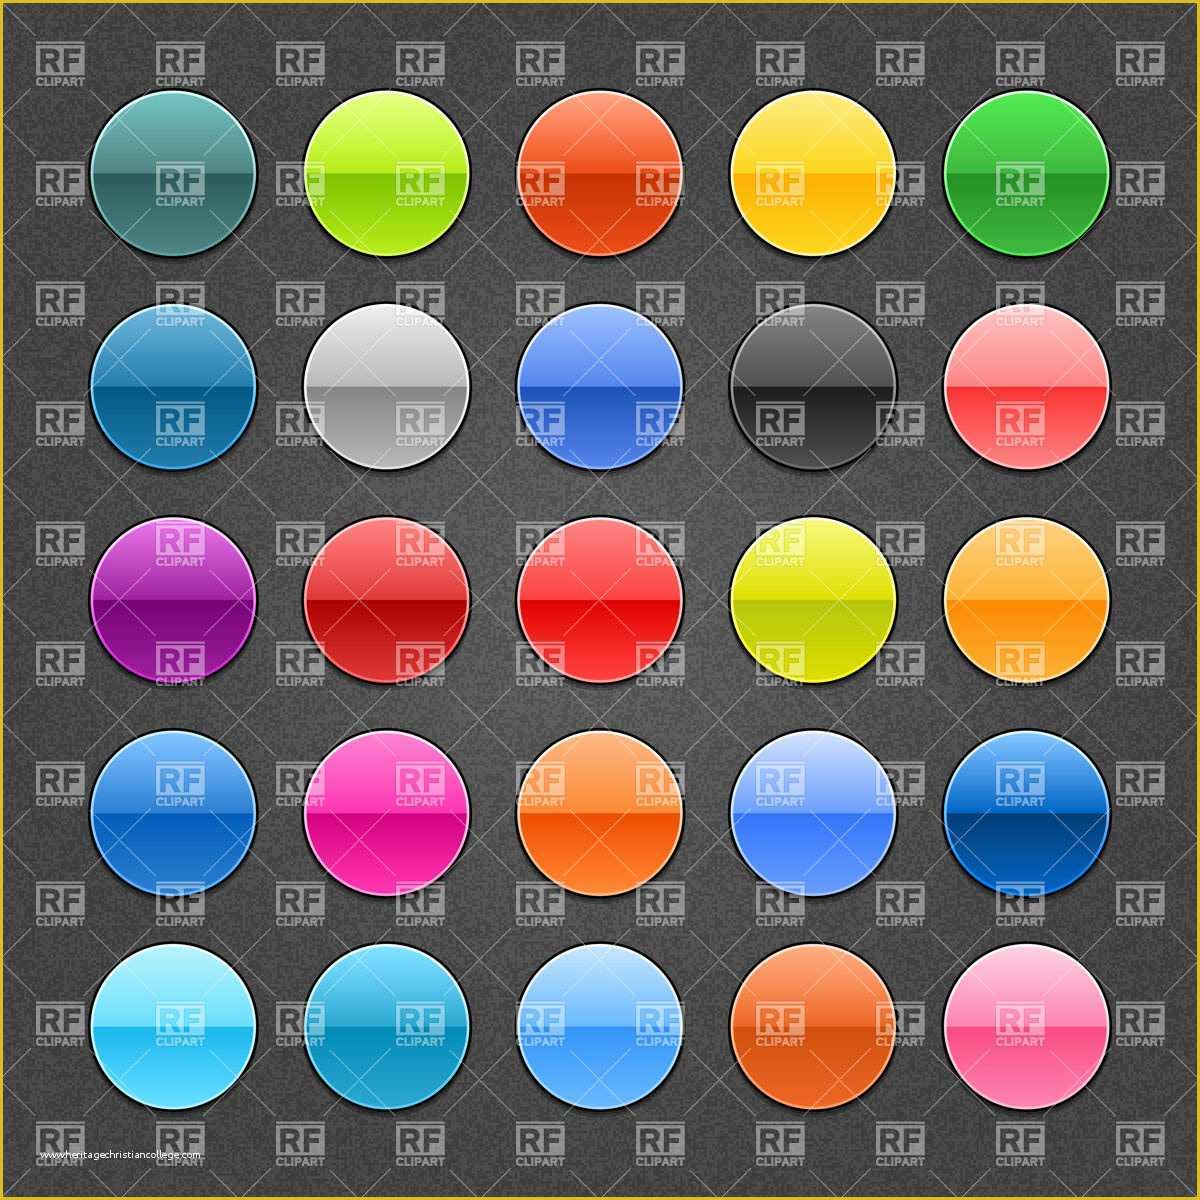 campaign-button-template-free-download-of-round-multicolored-blank